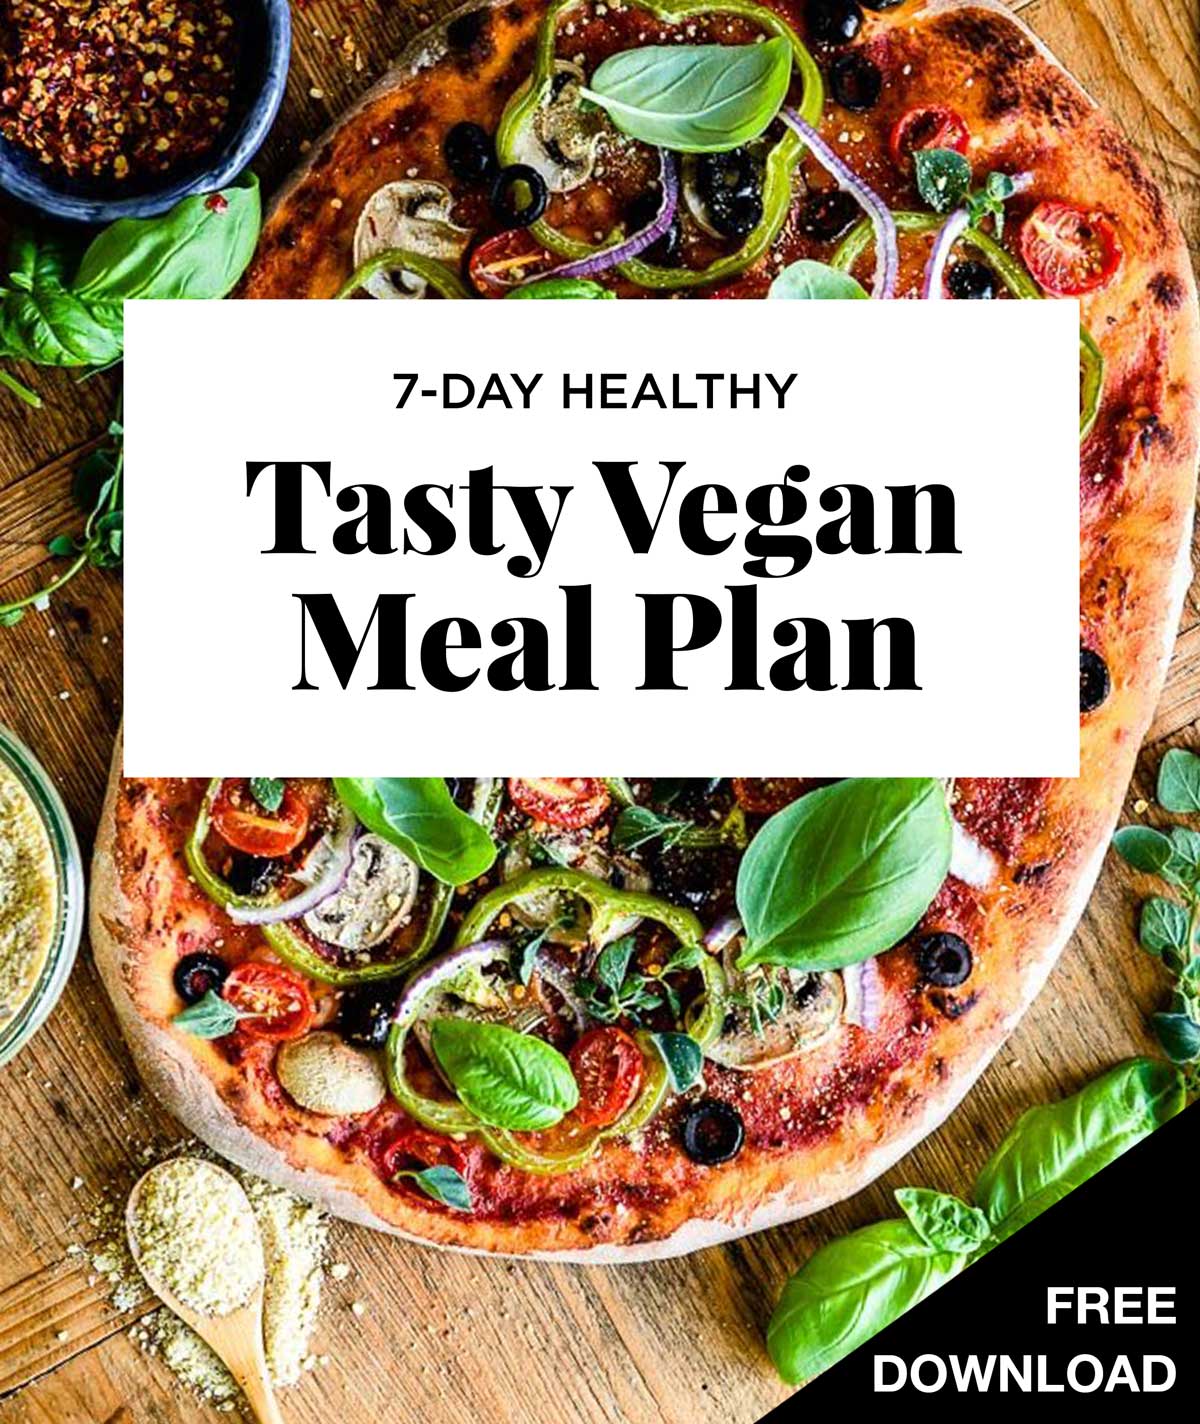 graphic for a free 7-day menu that is completely vegan